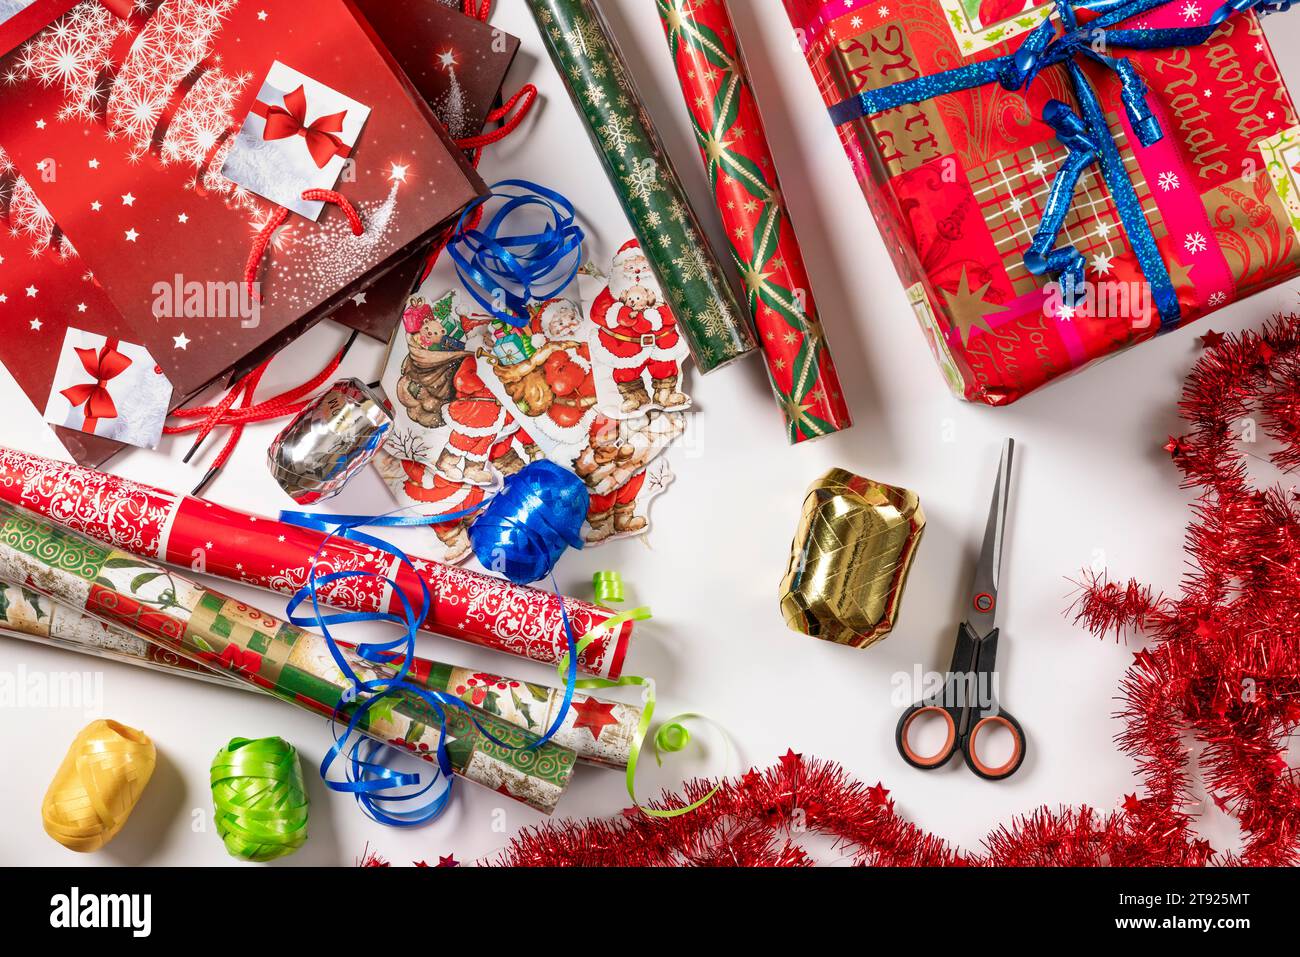 Gift wrapping, christmassy, gift bags, paper, tags, ribbon, scissors, white background Stock Photo